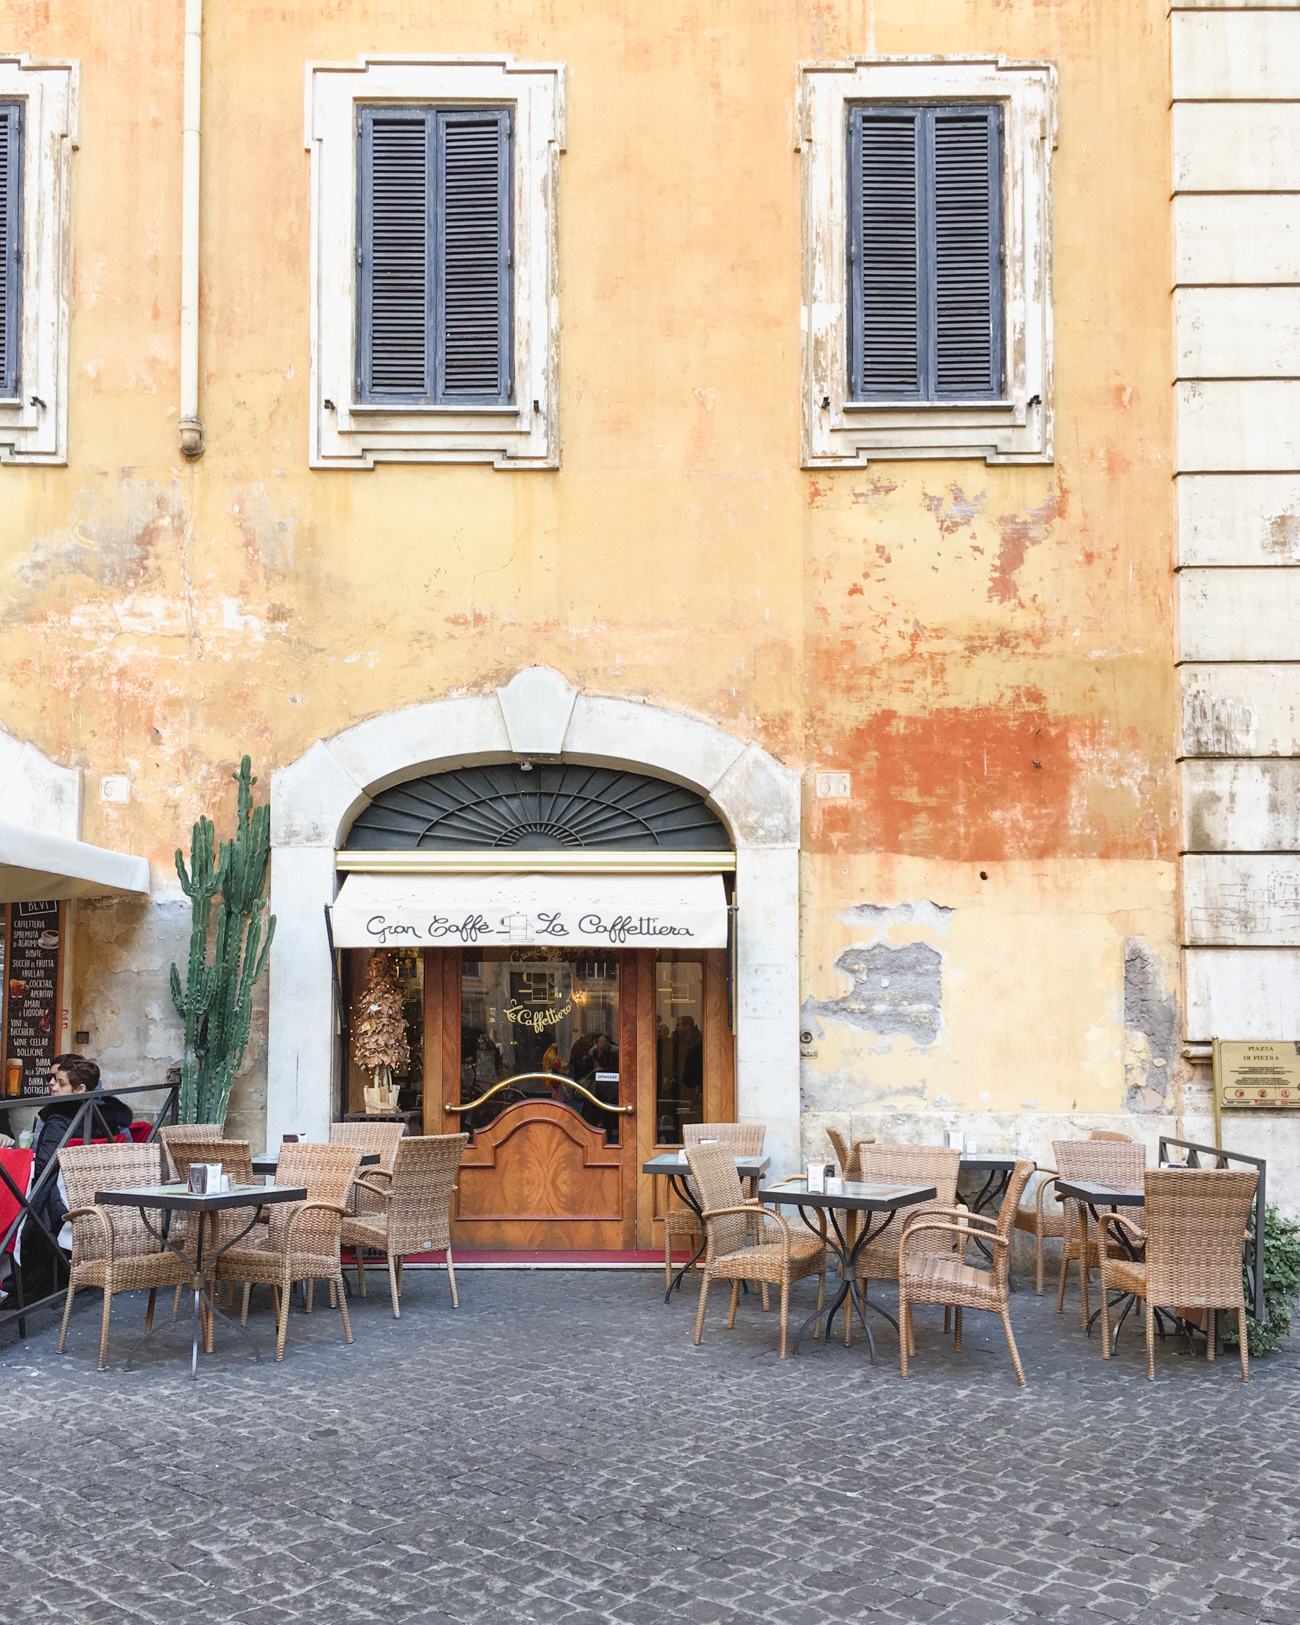 25 things you must do in Rome, Italy